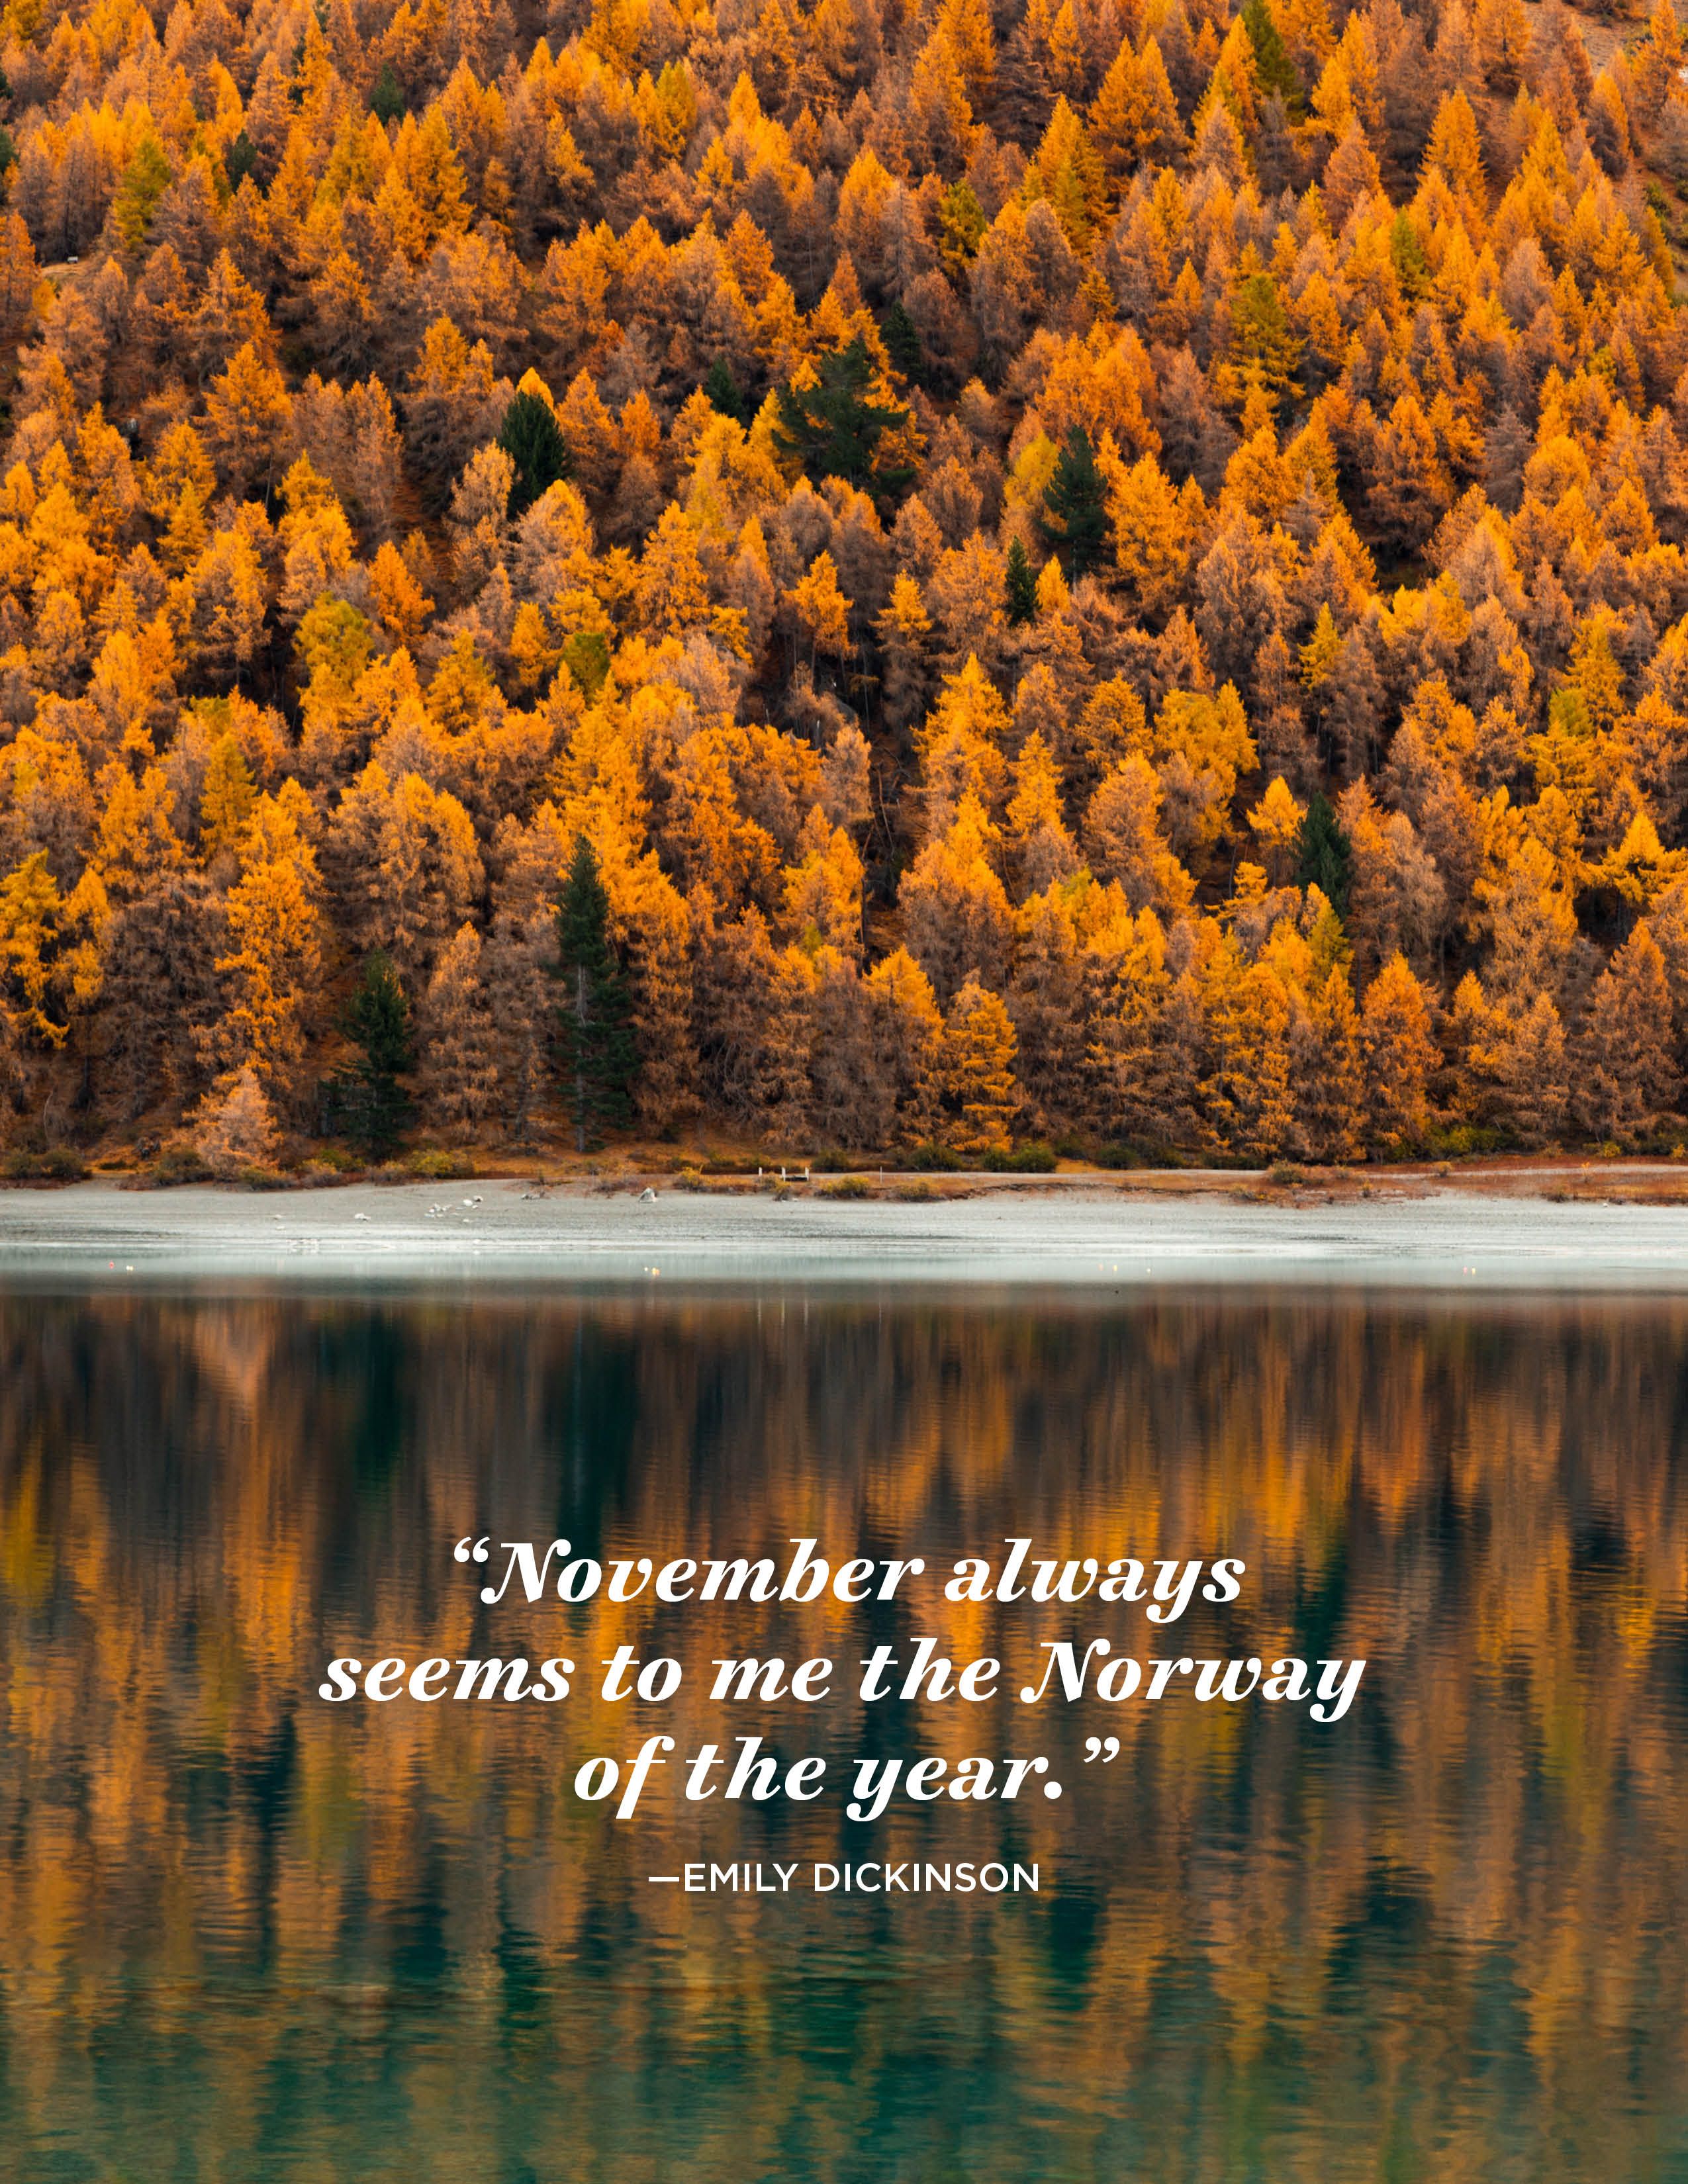 24 Inspiring November Quotes - Famous Sayings and Quotes about November